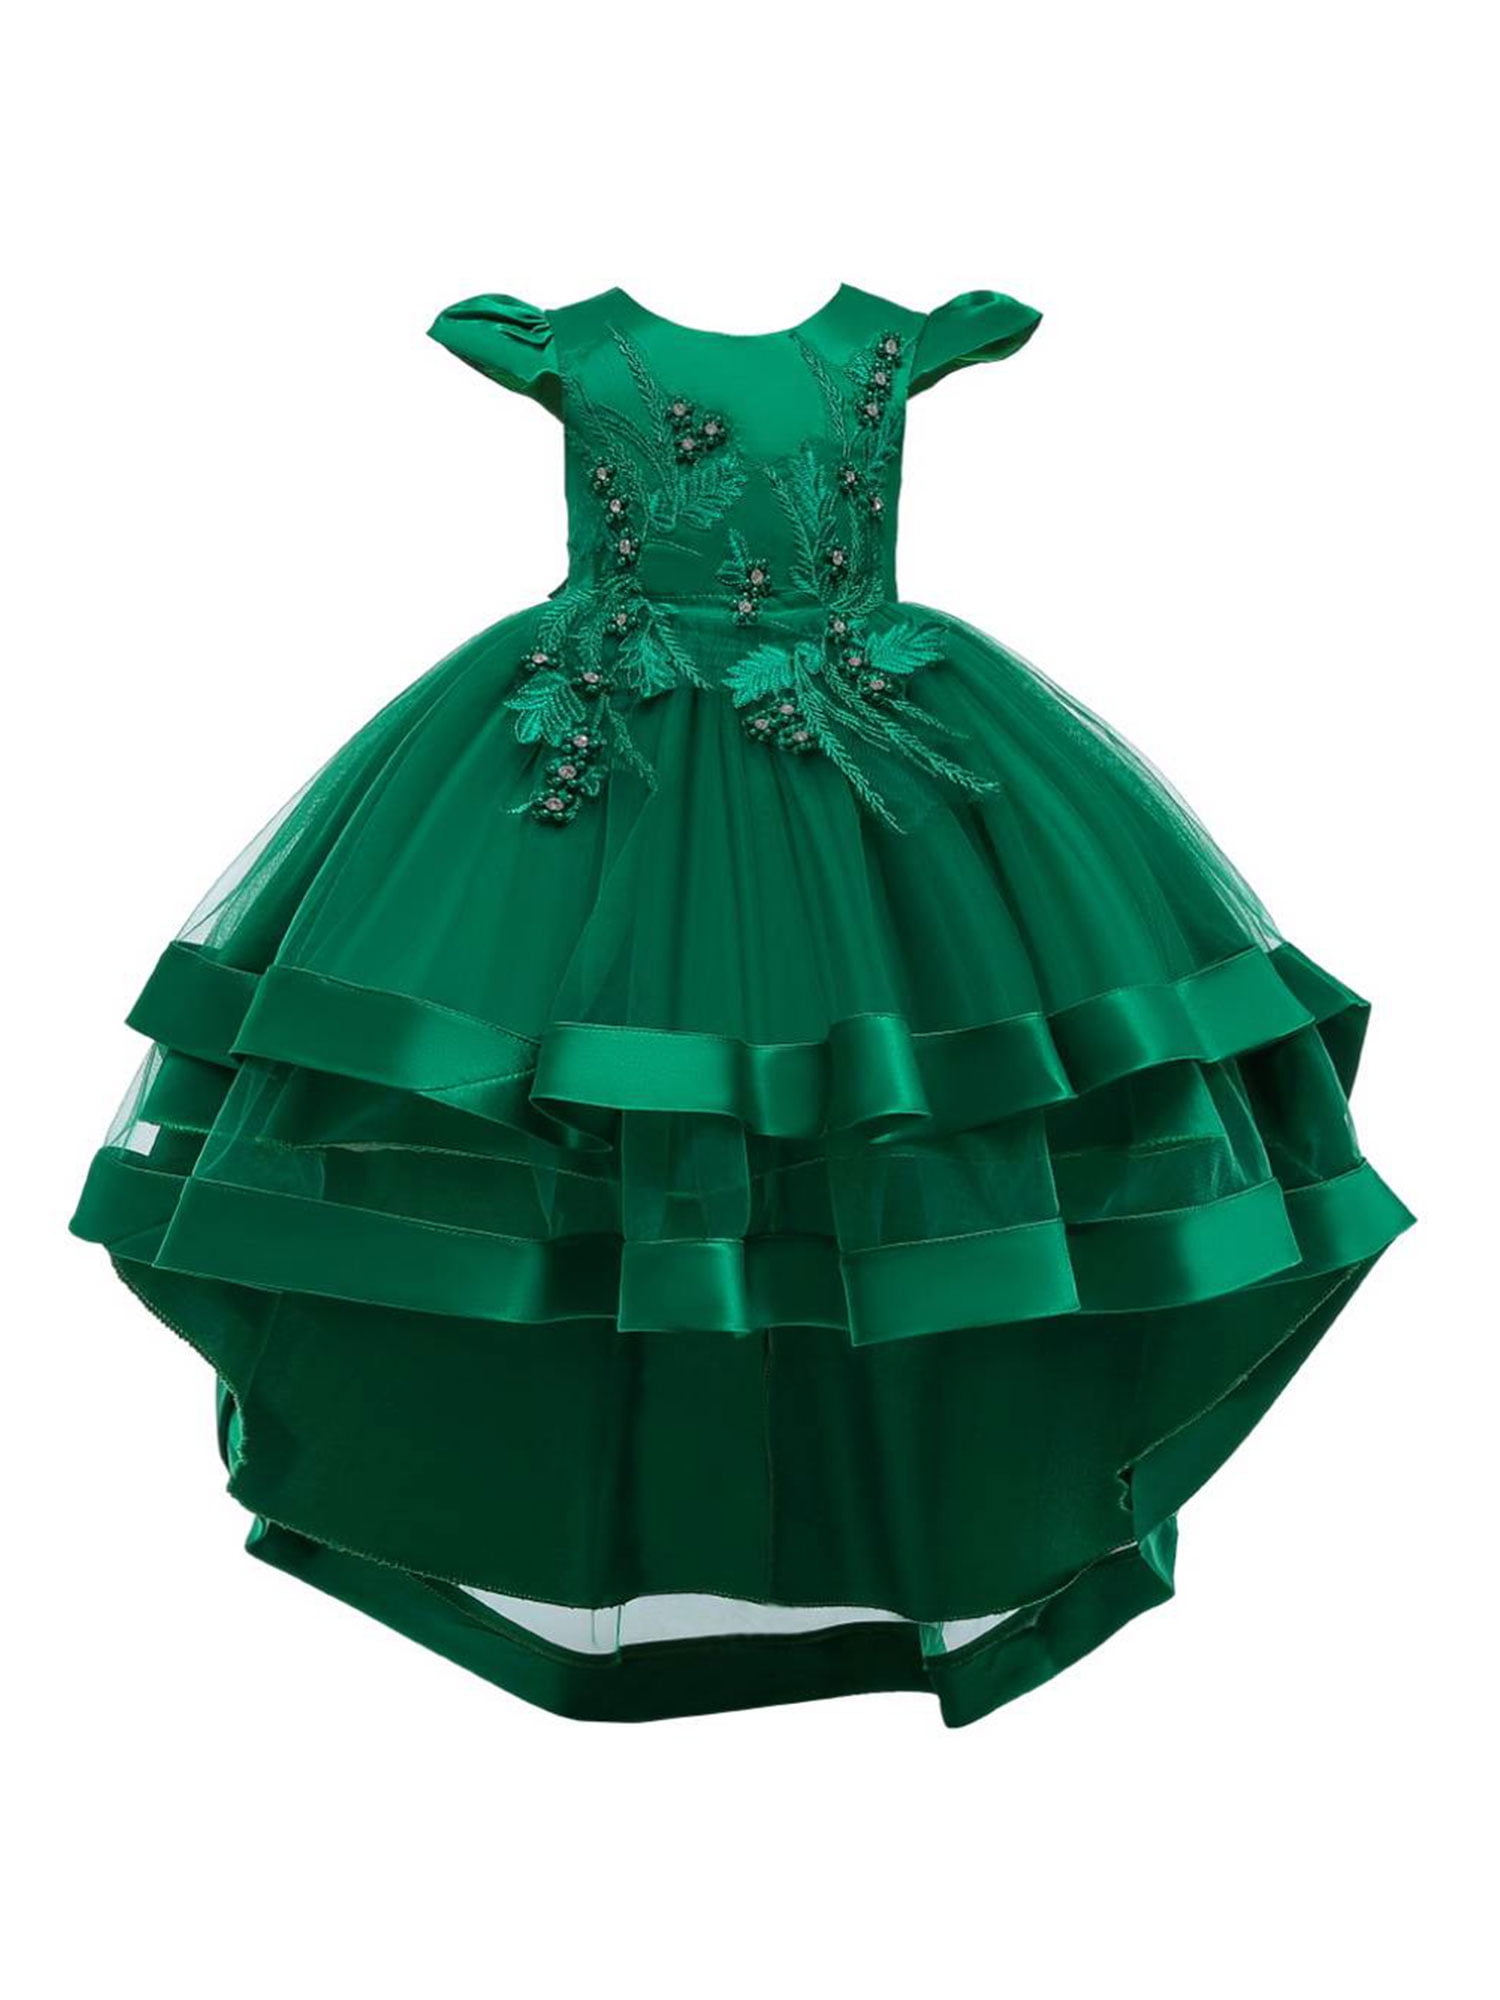 Kids Baby Girls Plaid Summer Holiday Party Birthday Ruffle Cake Tulle Prom Dress